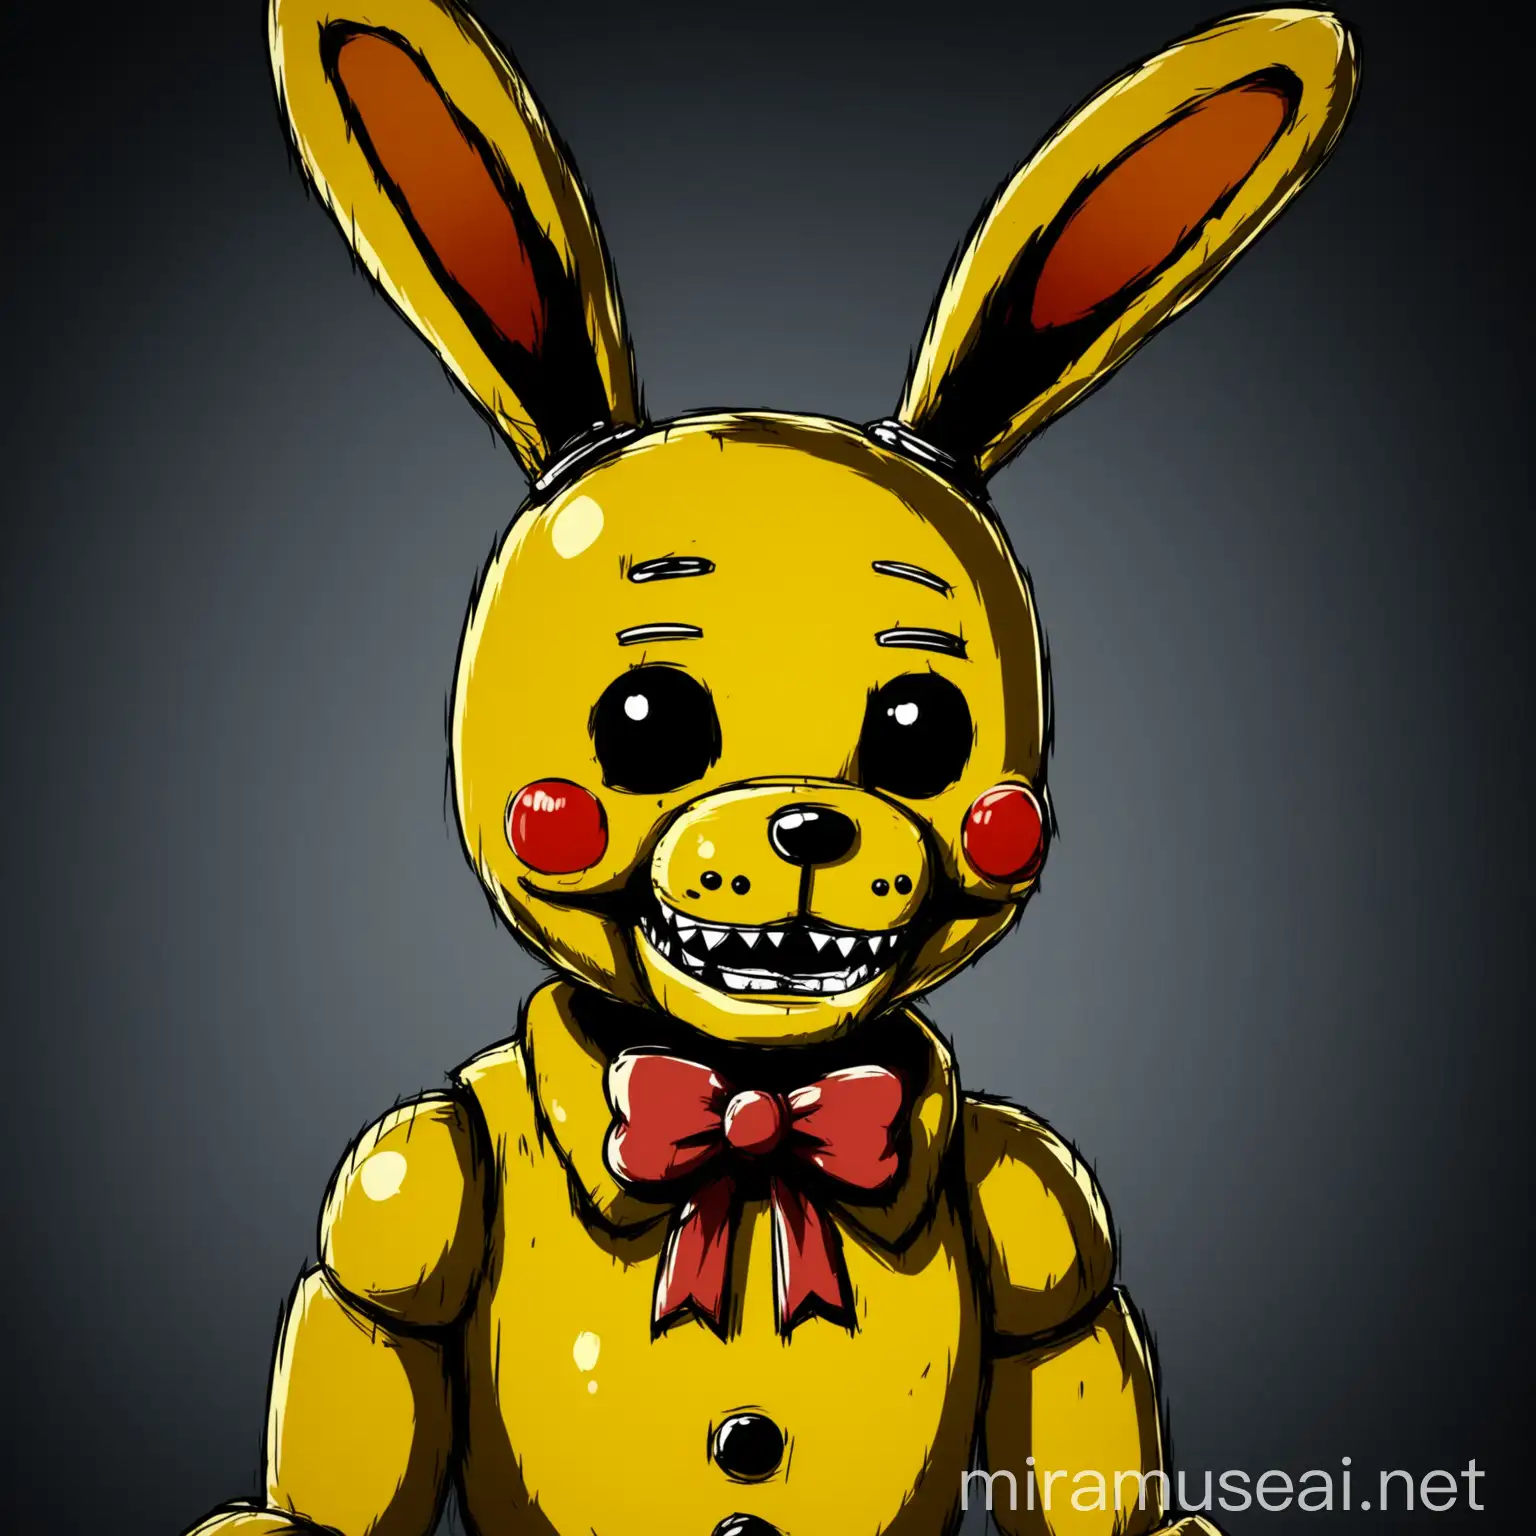 The yellow rabbit from fnaf In anime style